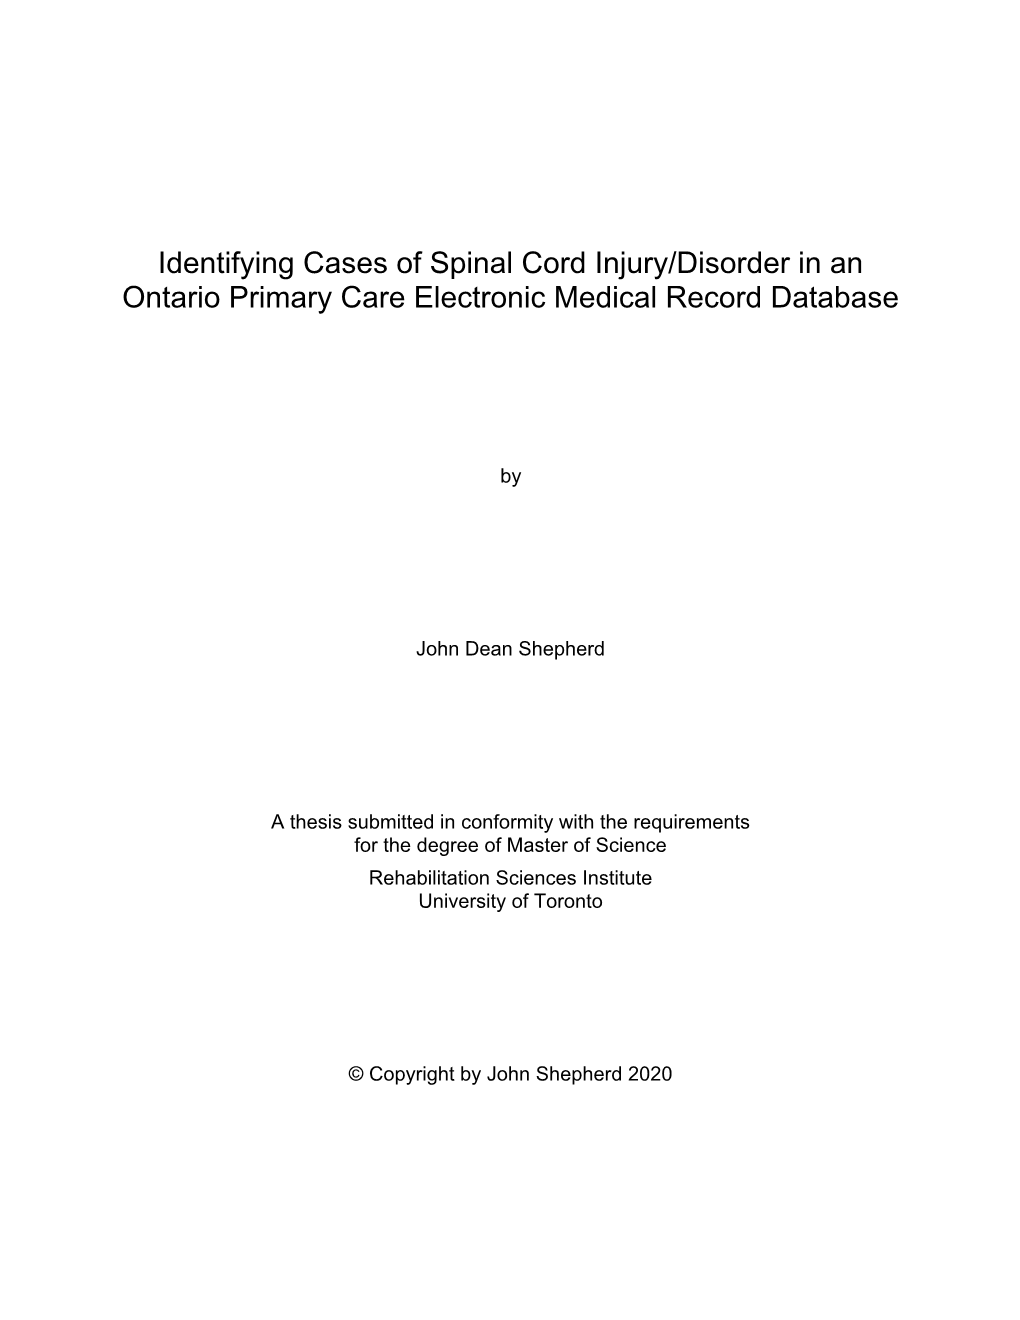 Identifying Cases of Spinal Cord Injury/Disorder in an Ontario Primary Care Electronic Medical Record Database